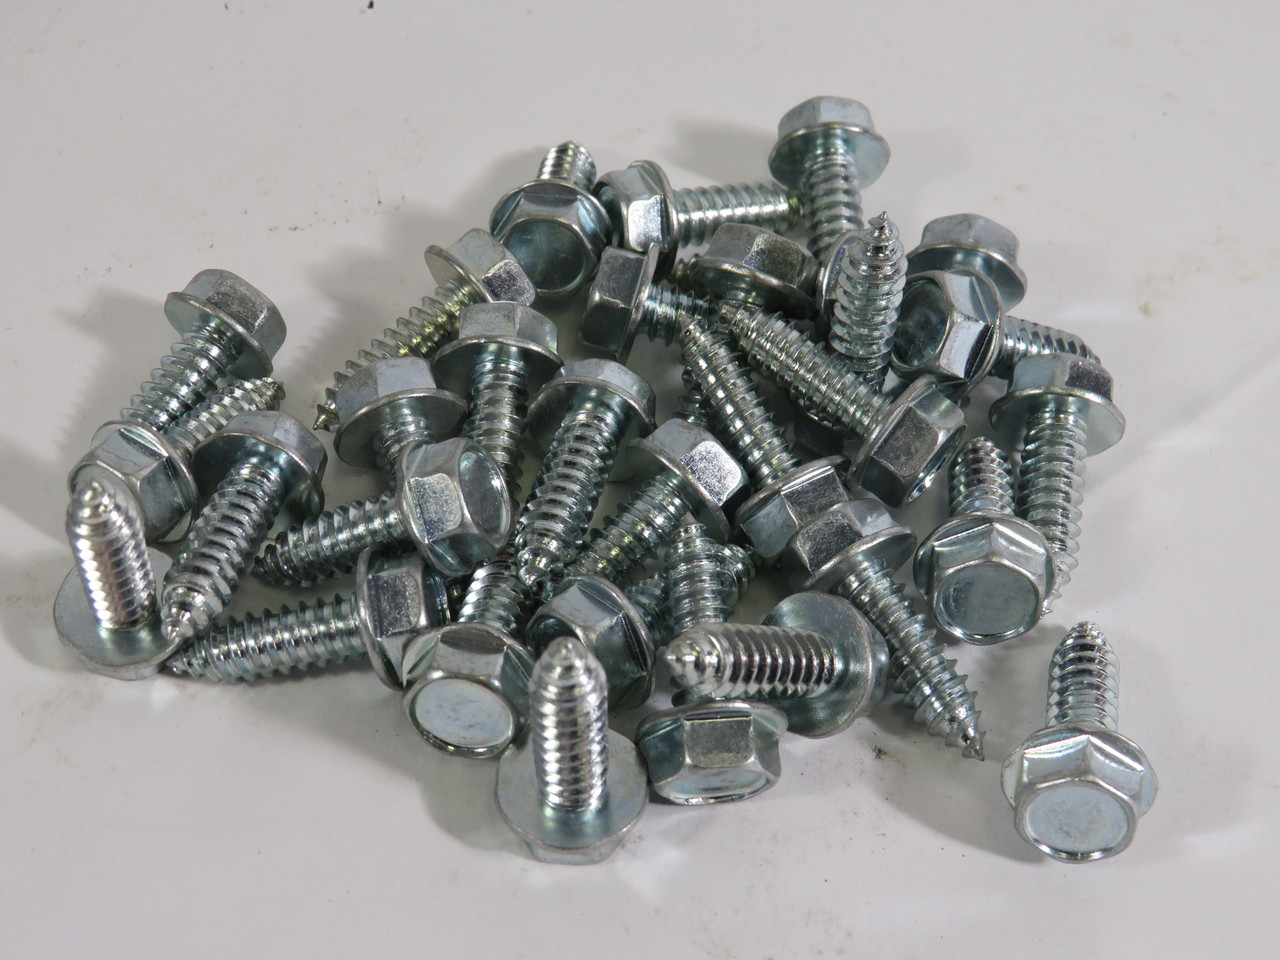 Spaenaur ST-369H Tapping Screw 5/16" x 1" Type AB Lot of 31 NEW